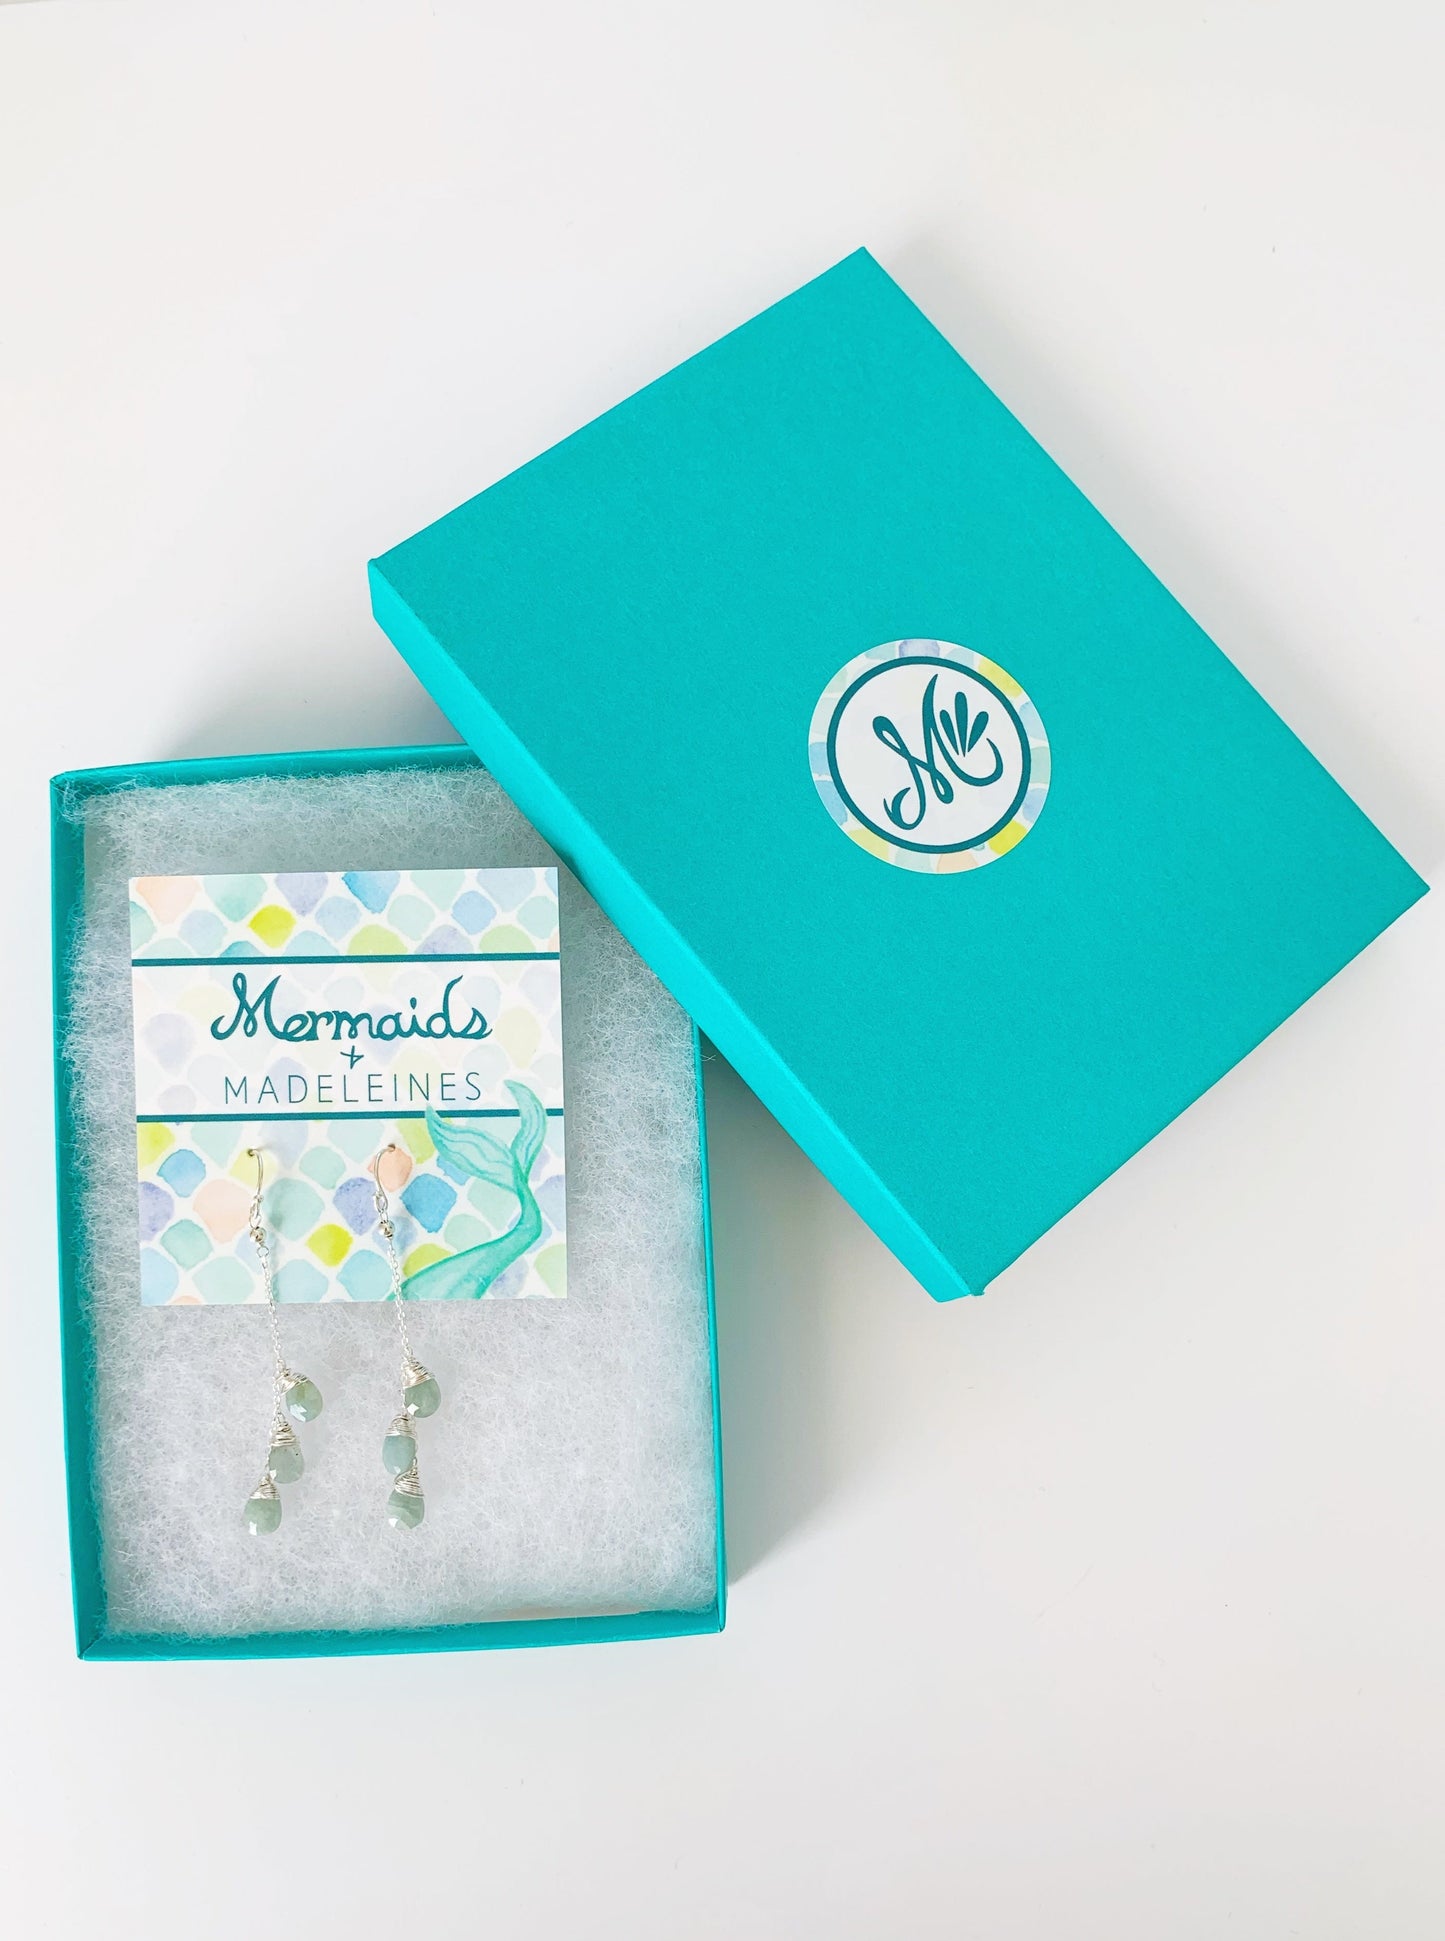 Raindrop earrings in sterling silver with aquamarine, photographed here in a teal gift box on a white surface